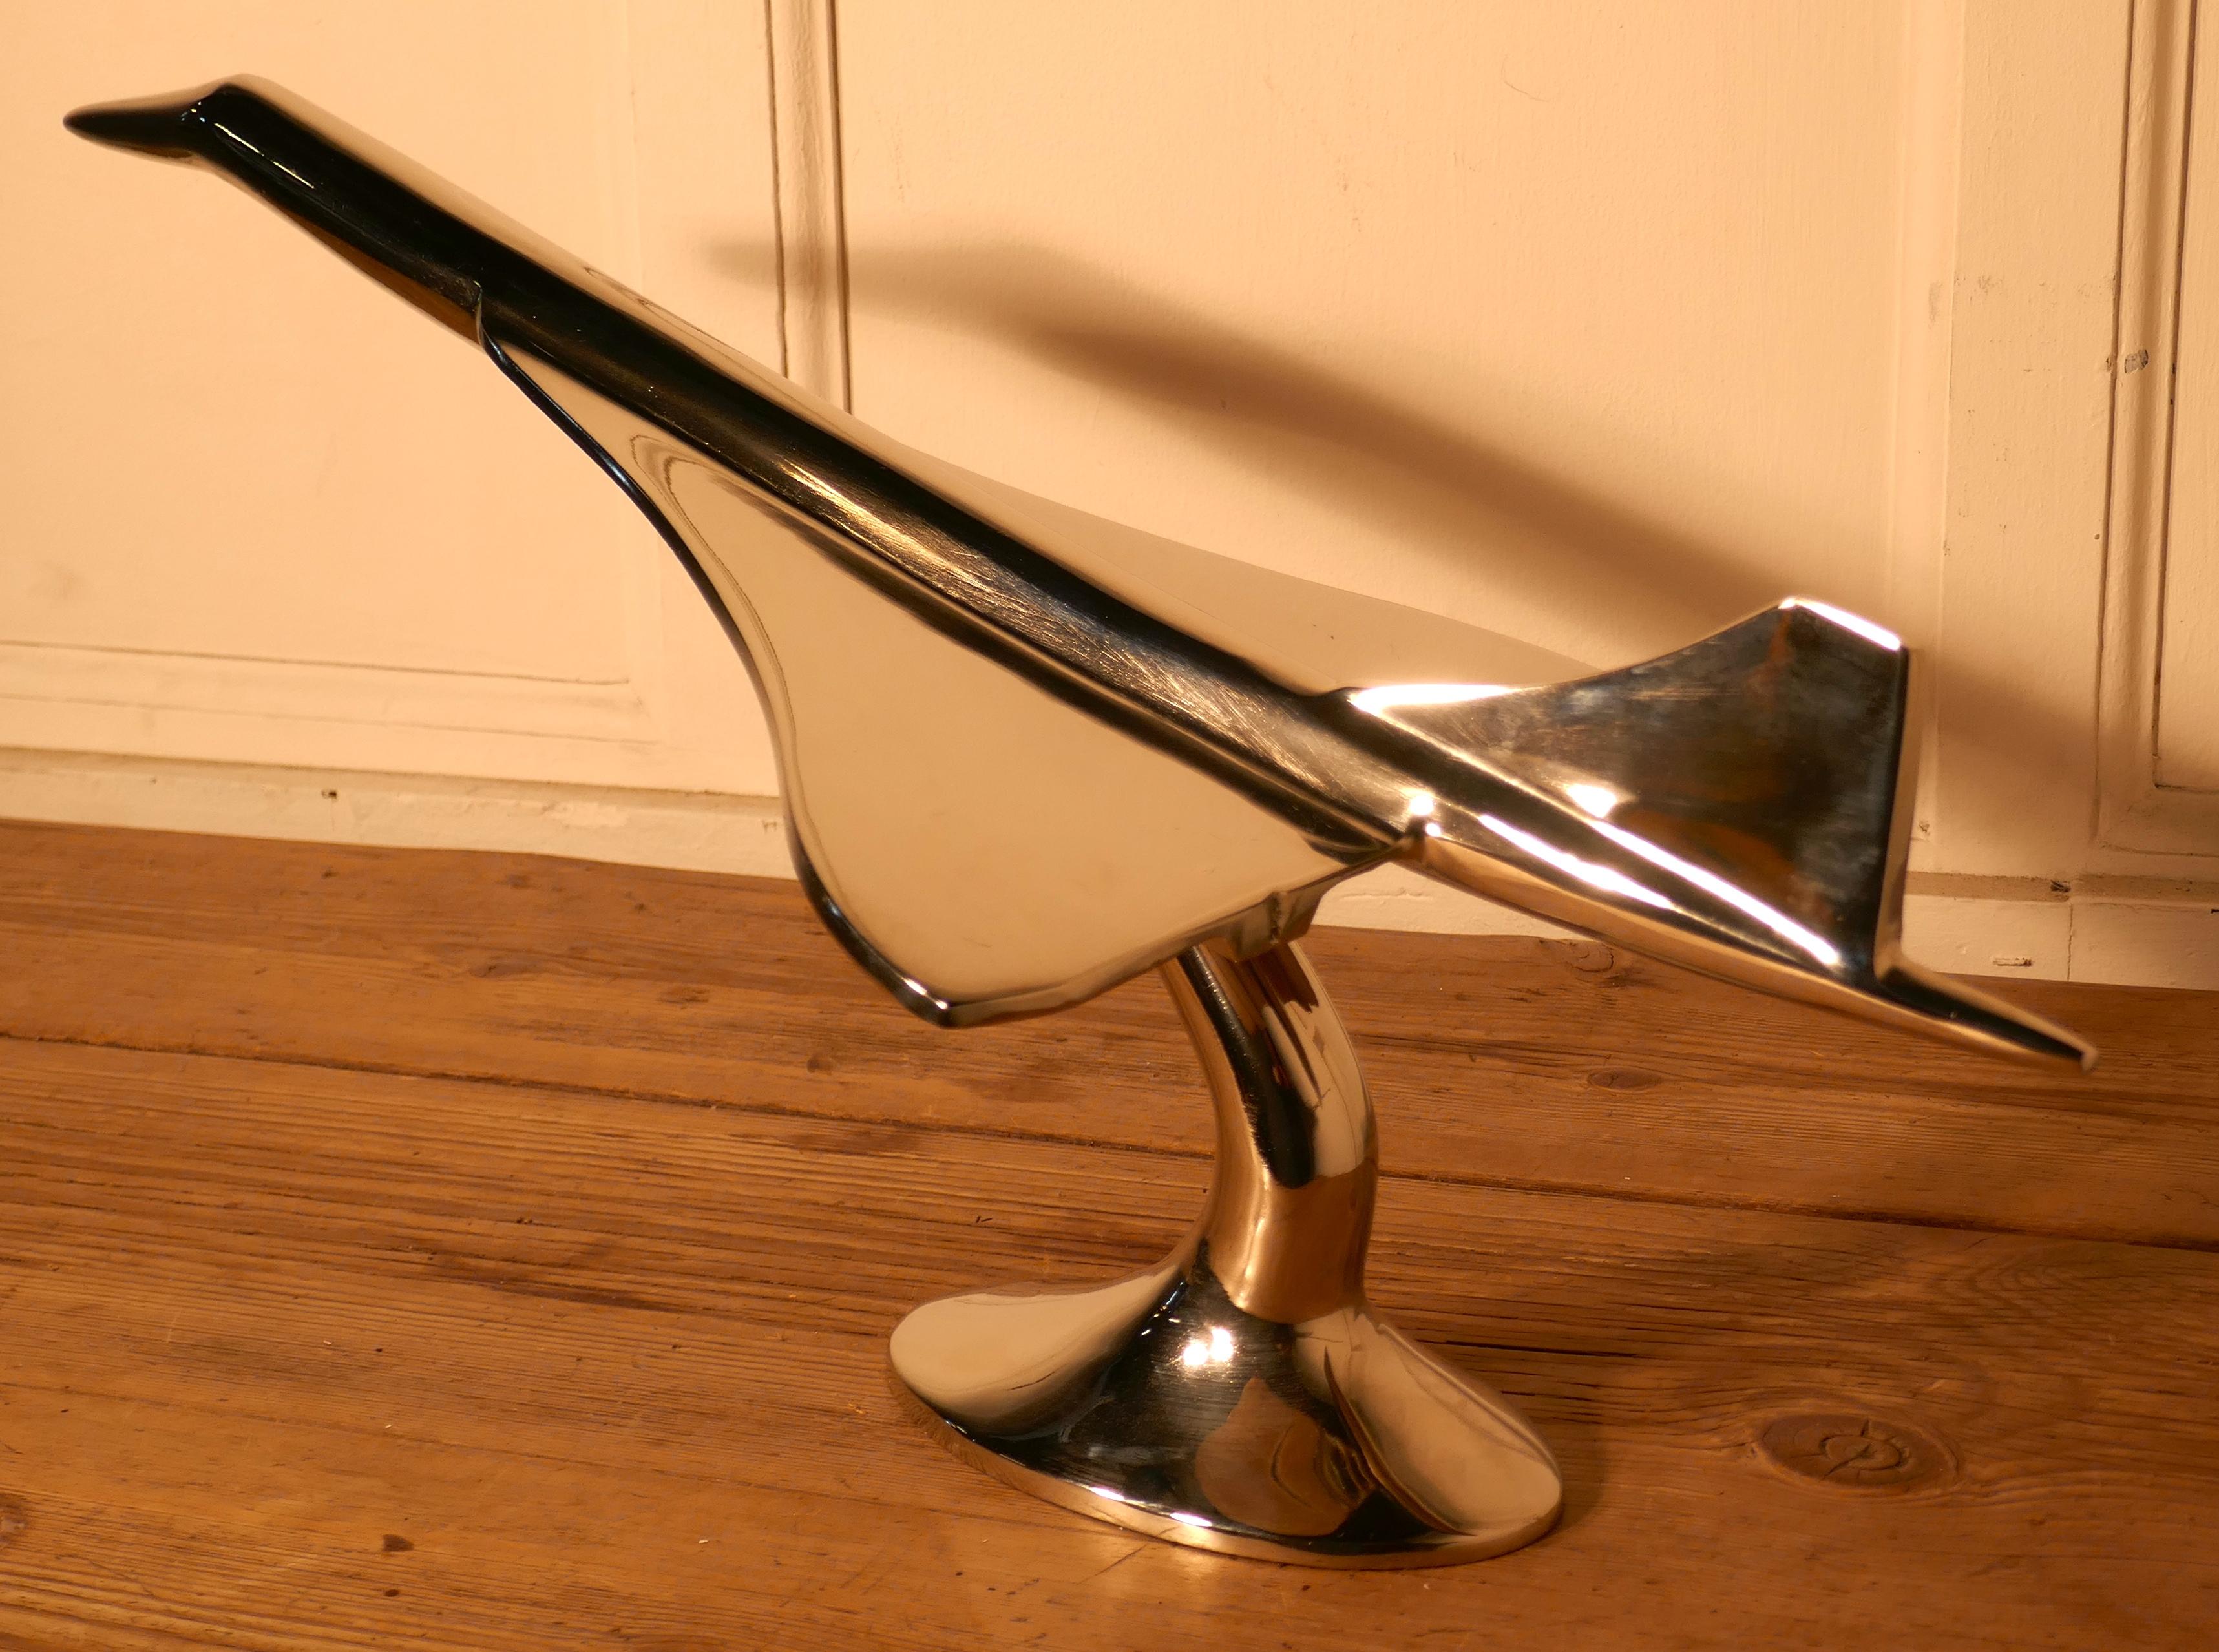 Large French chrome desk model of Concorde

A super piece and a great desk ornament for the desk that has everything else
The model is made in steel it has a chrome finish, it is in very good condition
Measures: 24” long, 11” high and 11”